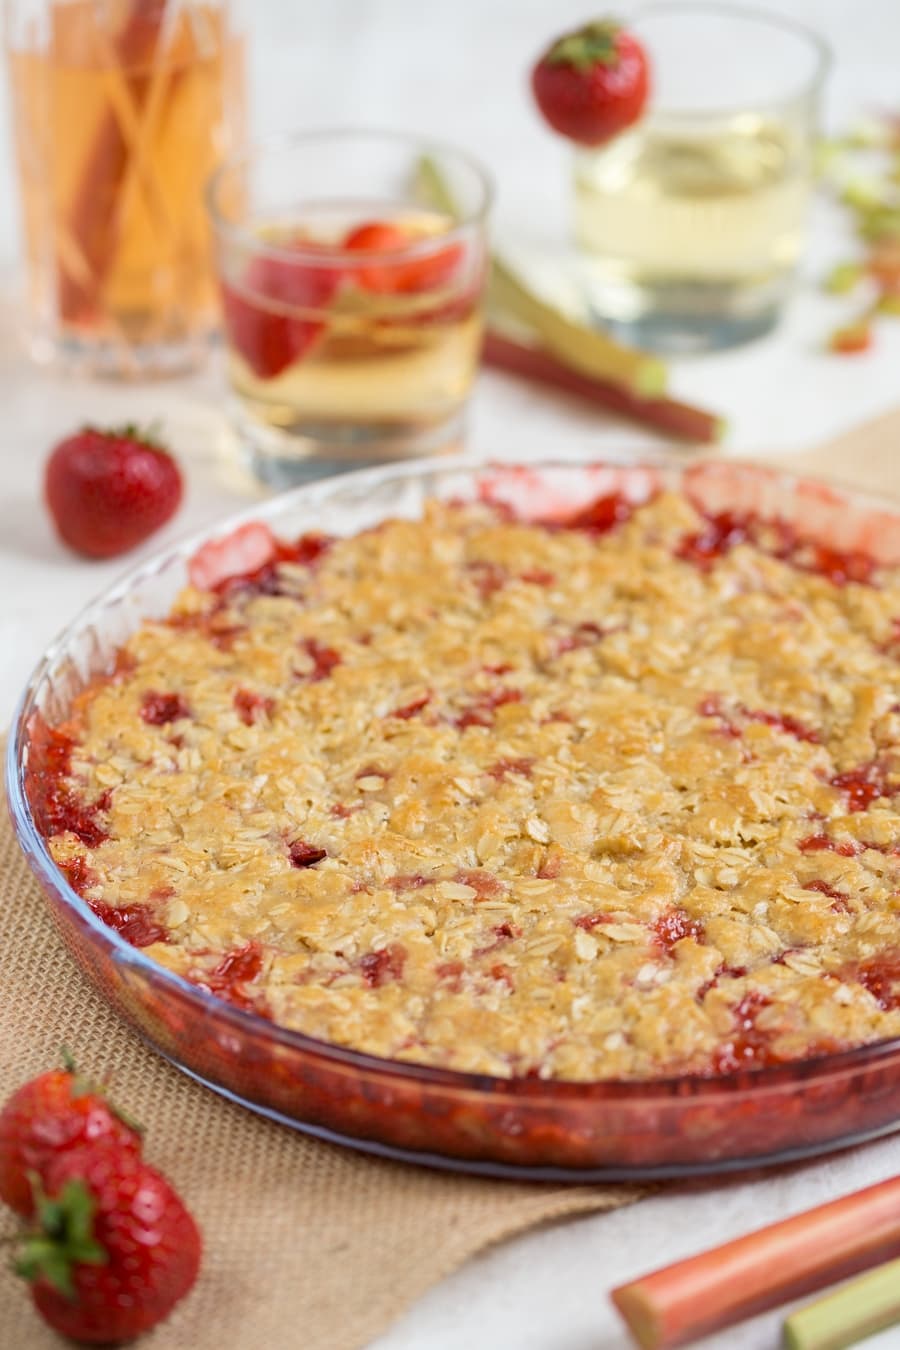 Baked strawberry rhubarb crisp, strawberry cocktails in the background.